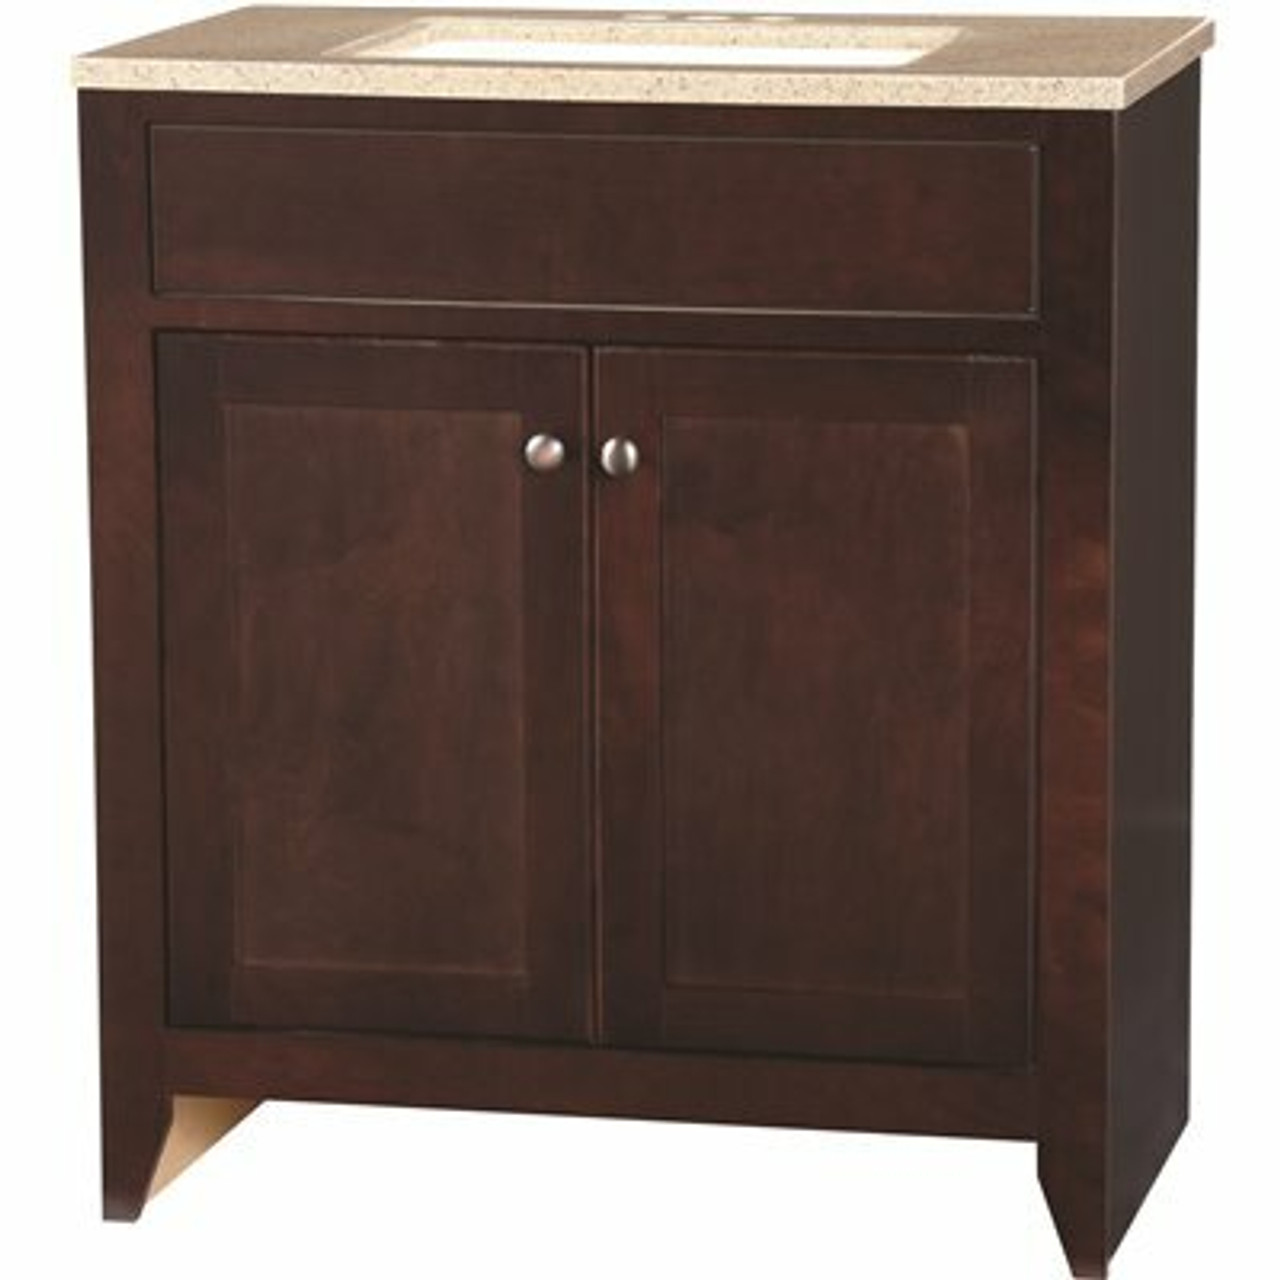 Glacier Bay Modular 30.5 In. W Bath Vanity In Java With Solid Surface Vanity Top In Cappuccino With White Sink